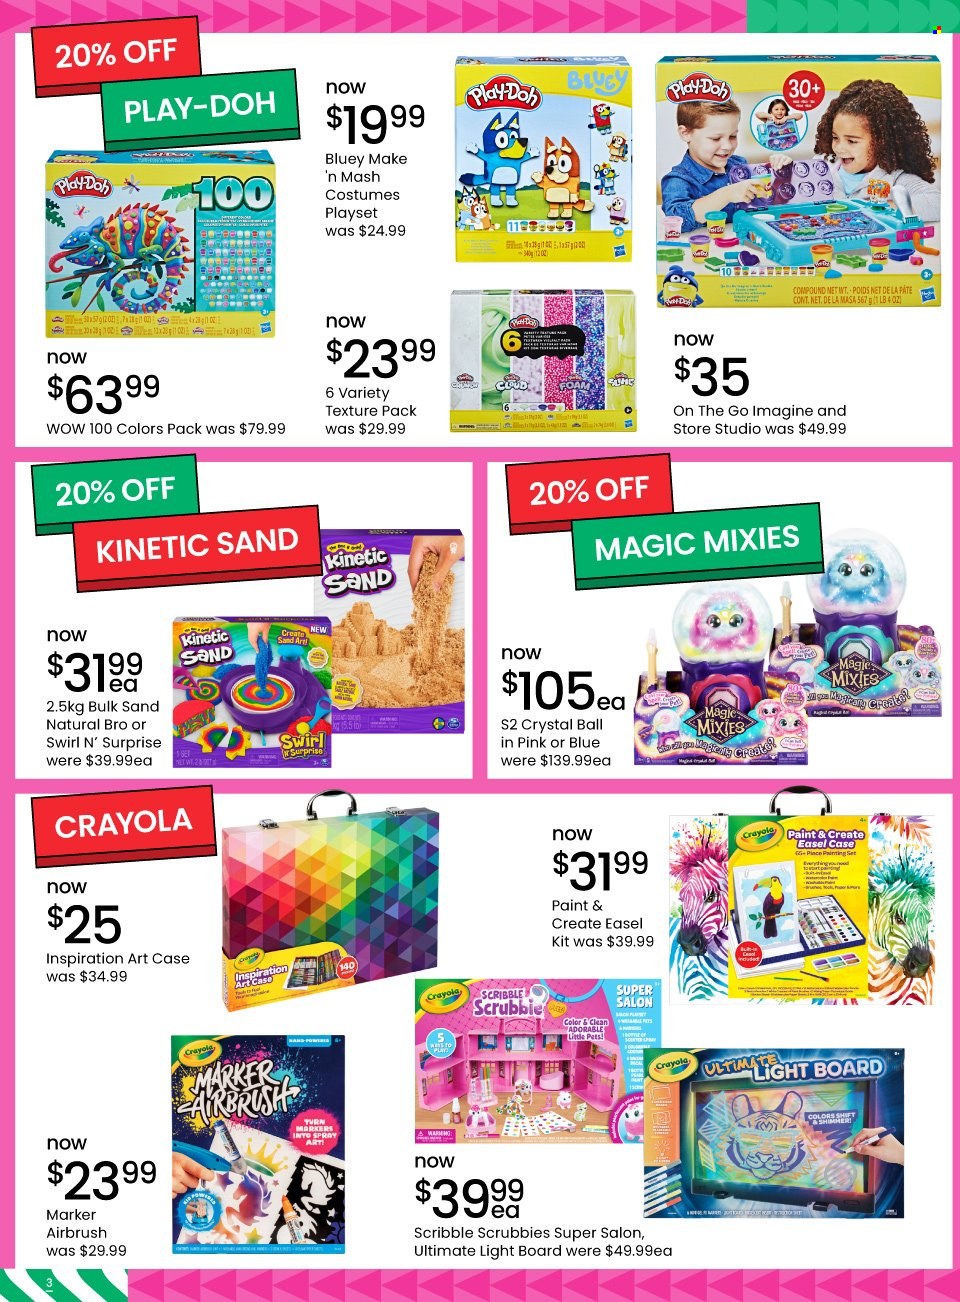 thumbnail - Myer Catalogue - 28 Nov 2022 - 24 Dec 2022 - Sales products - crayons, marker, easel, costume, play set, Play-doh. Page 3.